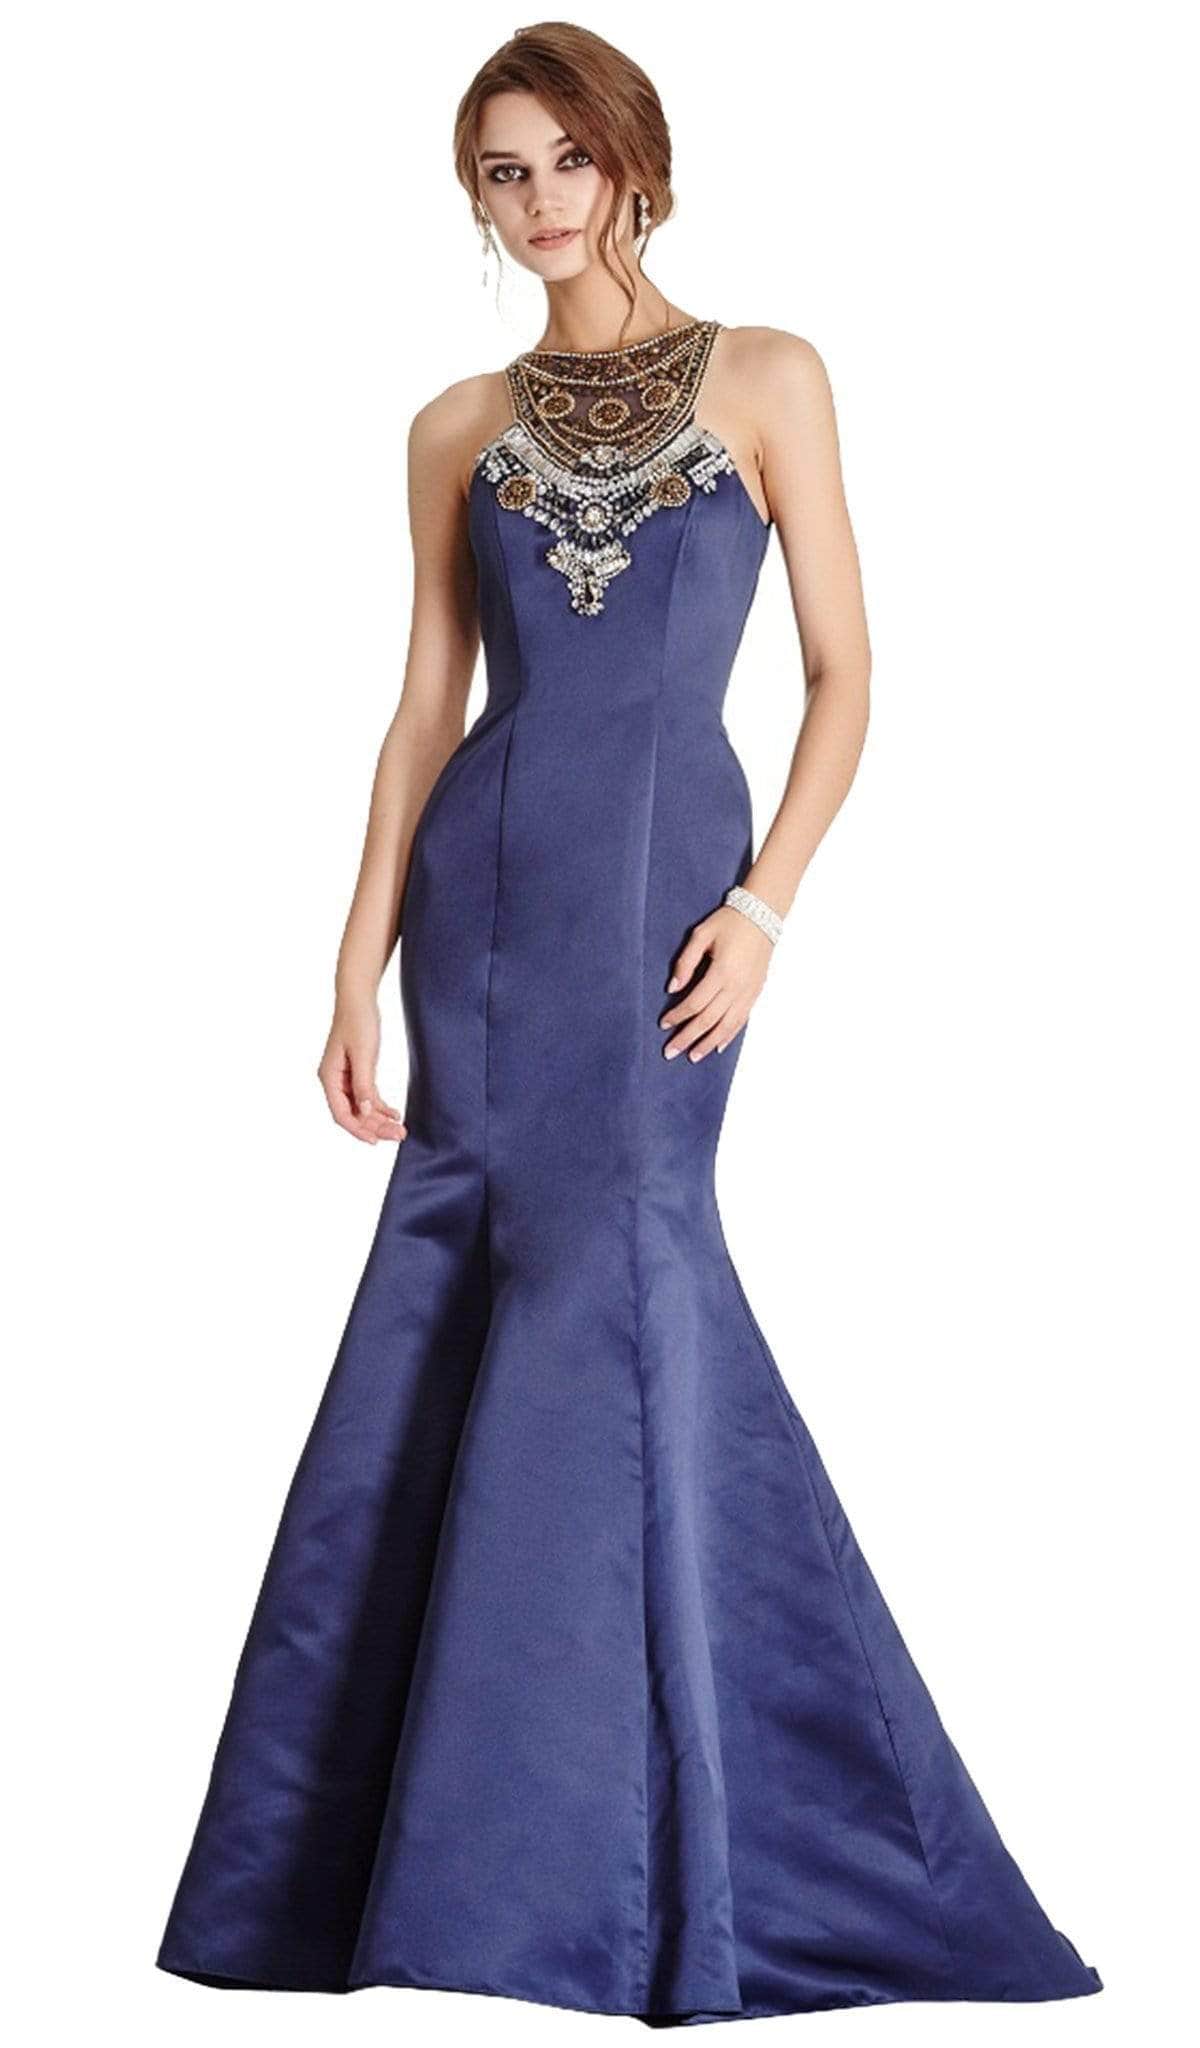 Aspeed Design - L1720 Embellished Sleeveless Evening Gown Evening Dresses XS 